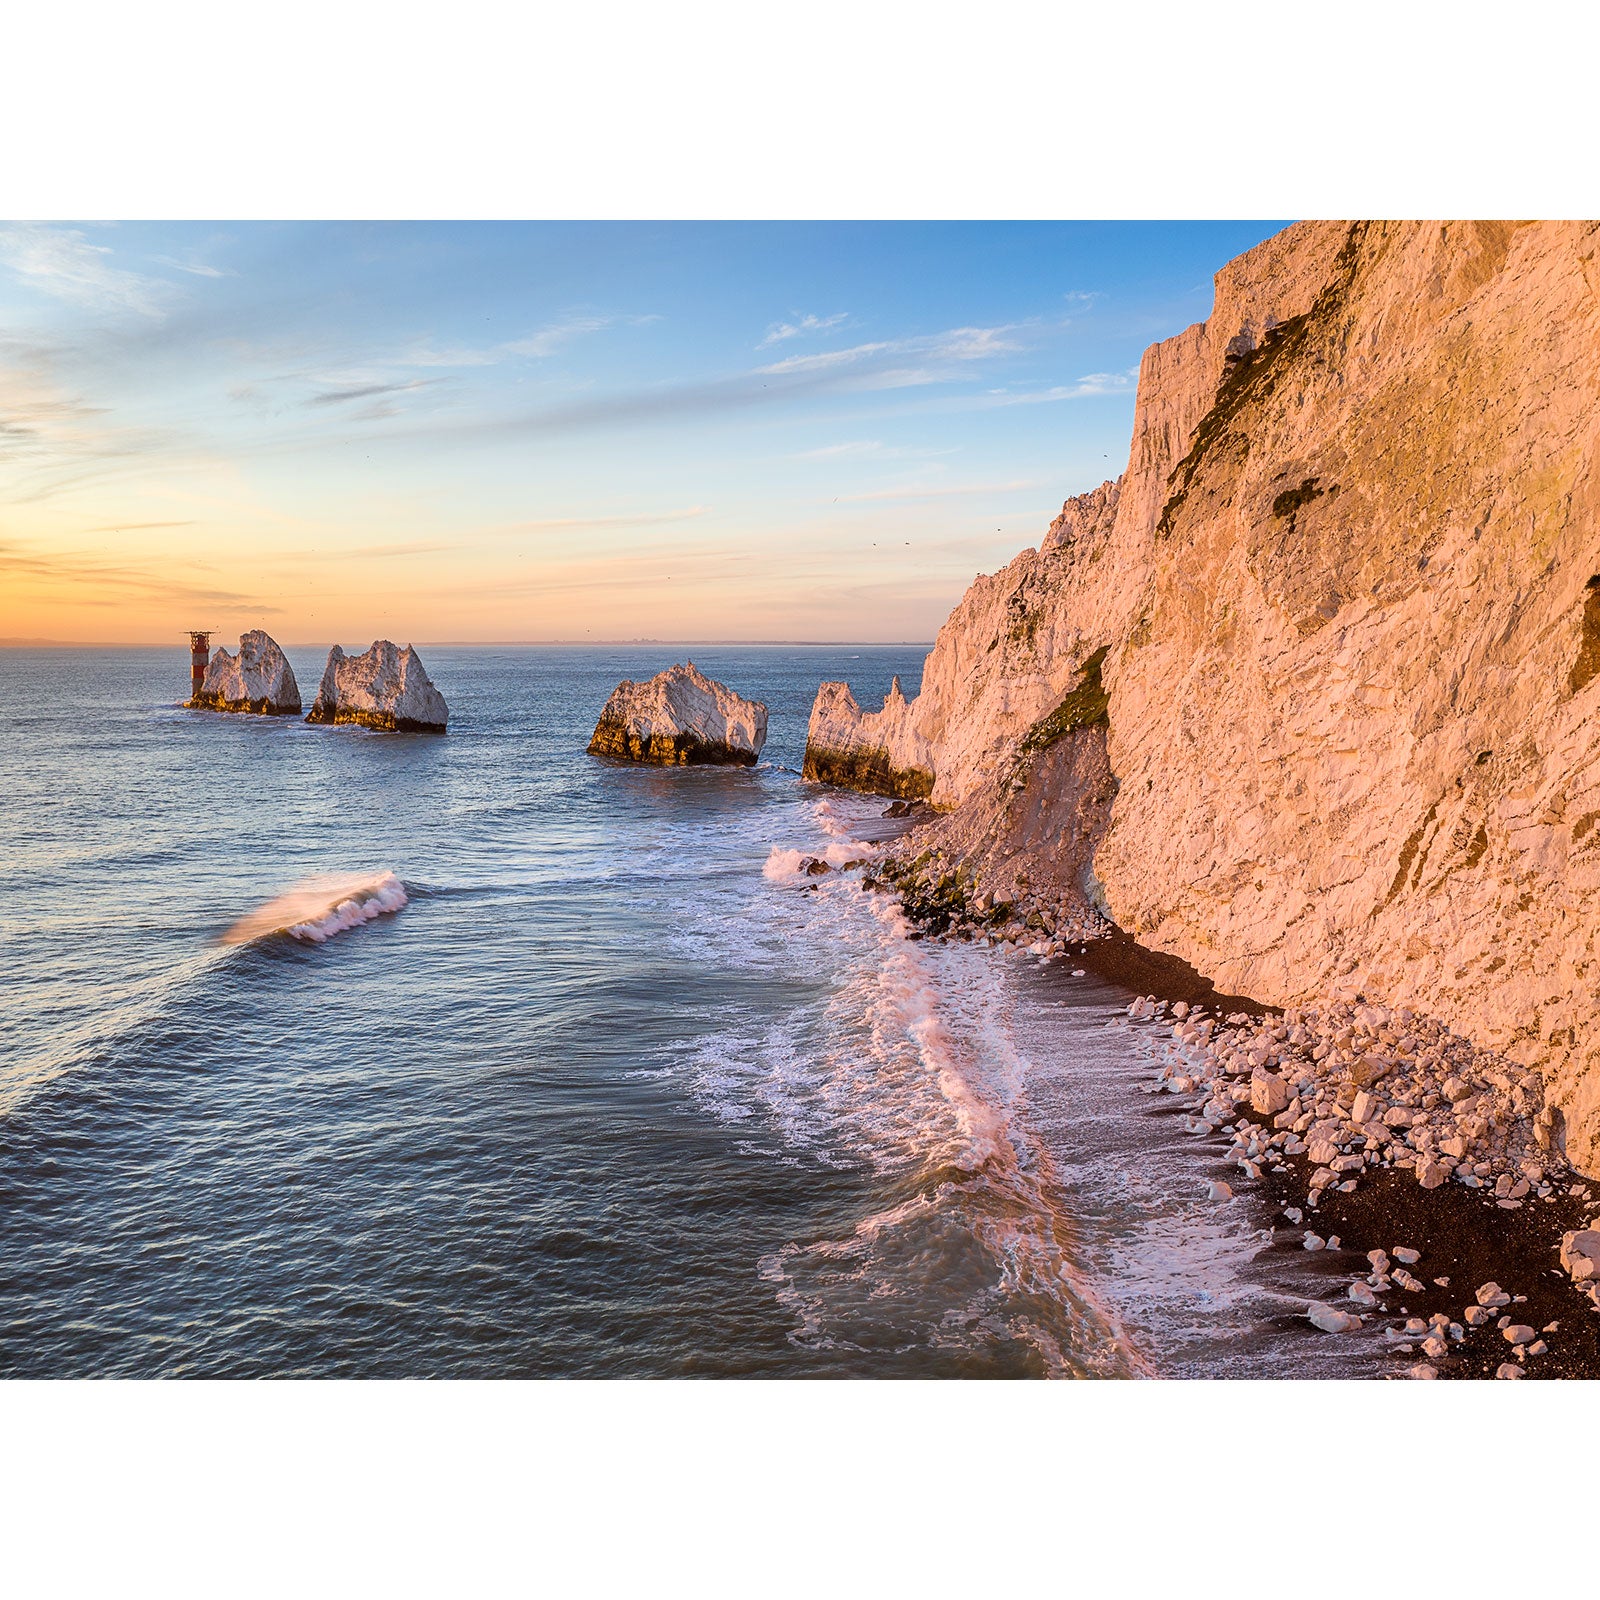 Golden sunlight illuminating a coastal scene with cliff faces and rock formations at sea on the Isle of Wight, captured beautifully by "The Needles" from Available Light Photography.